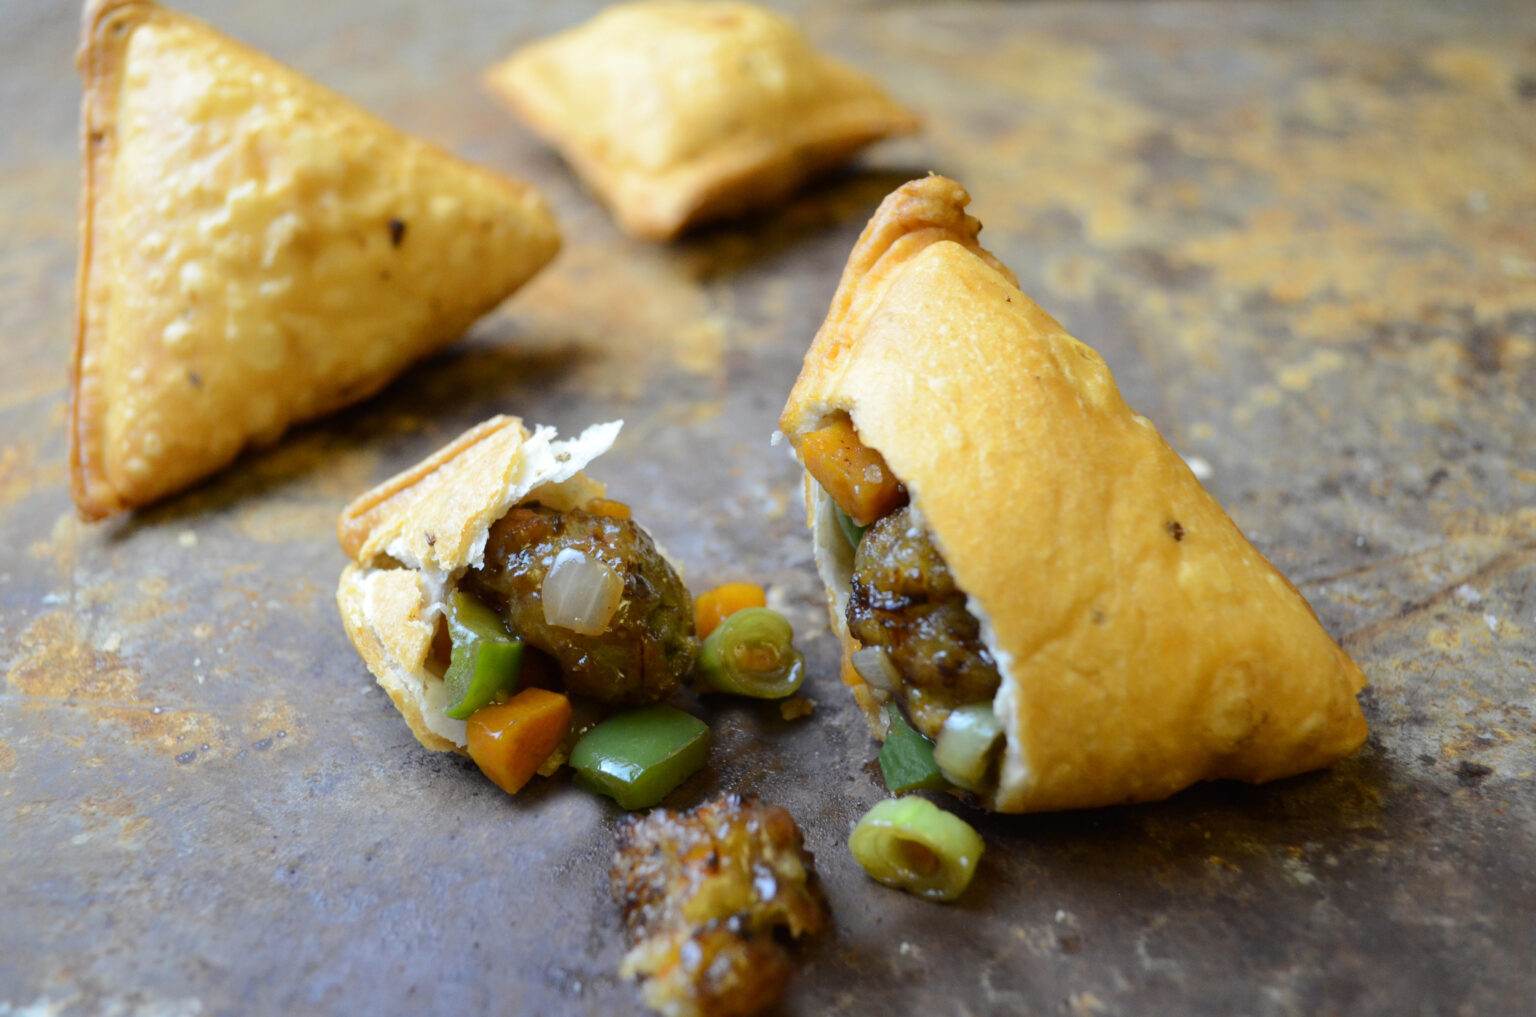 The Manchurian samosas with a burst of fusion flavours are another hit that the brand has introduced